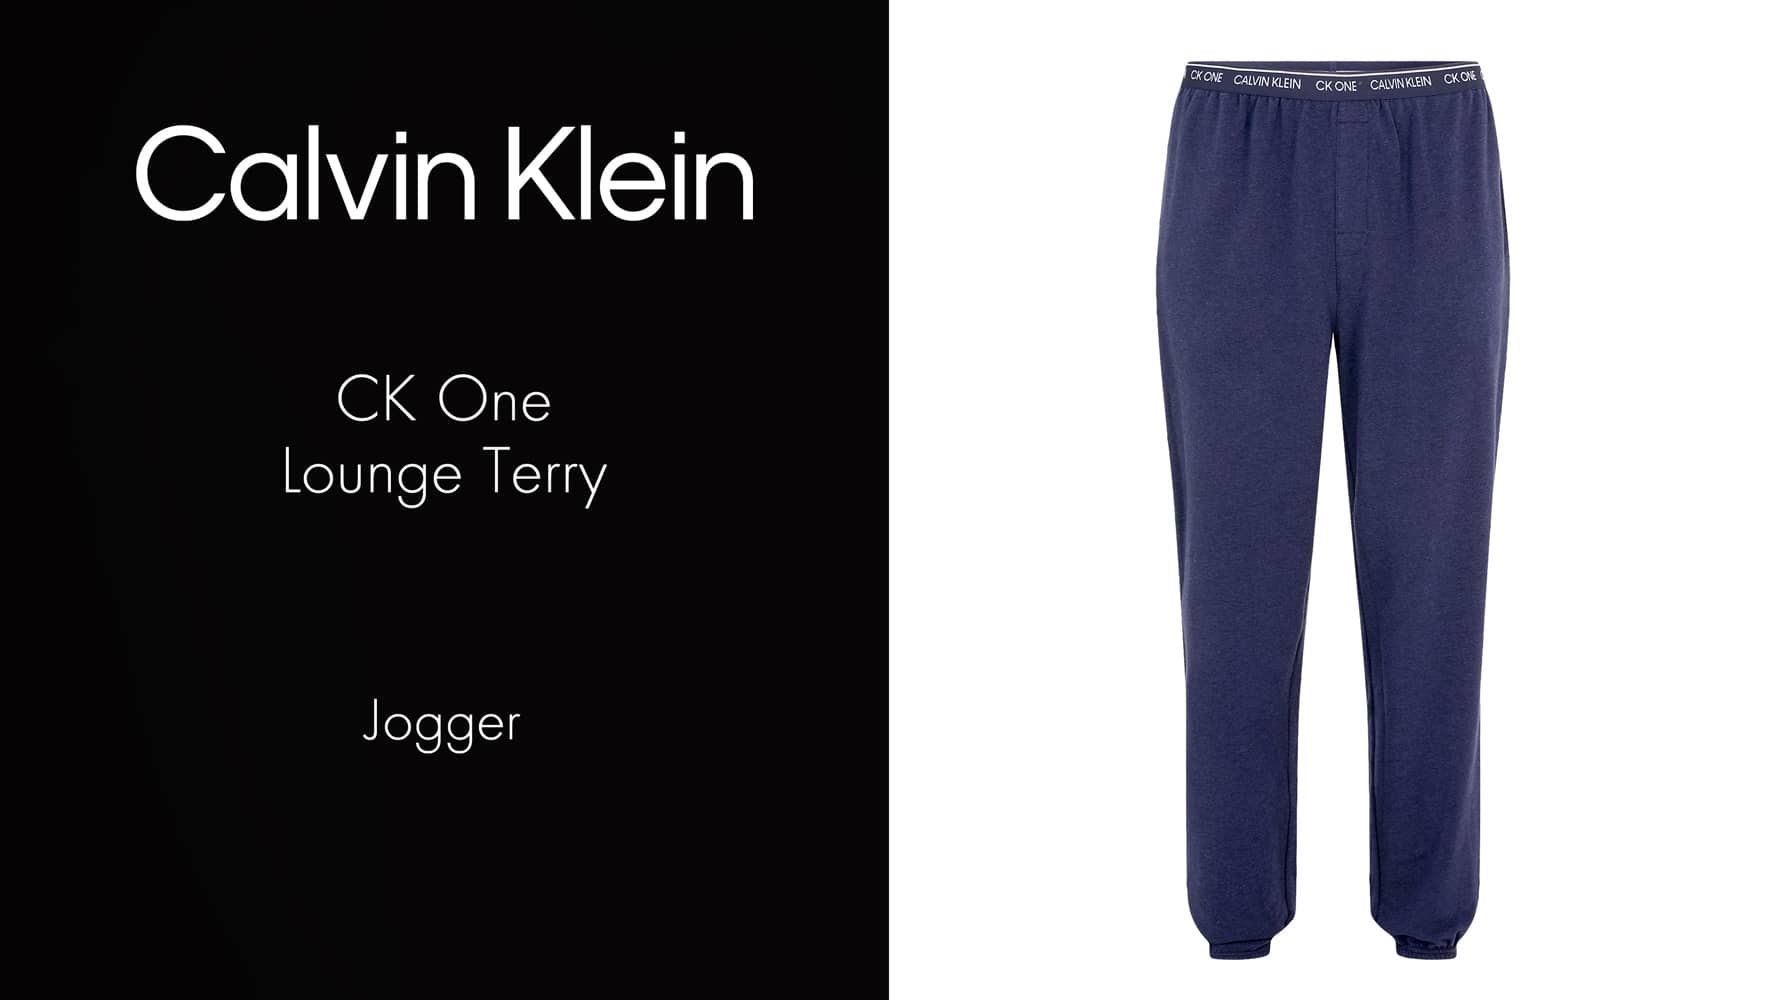 Jogger - CK One Lounge Terry